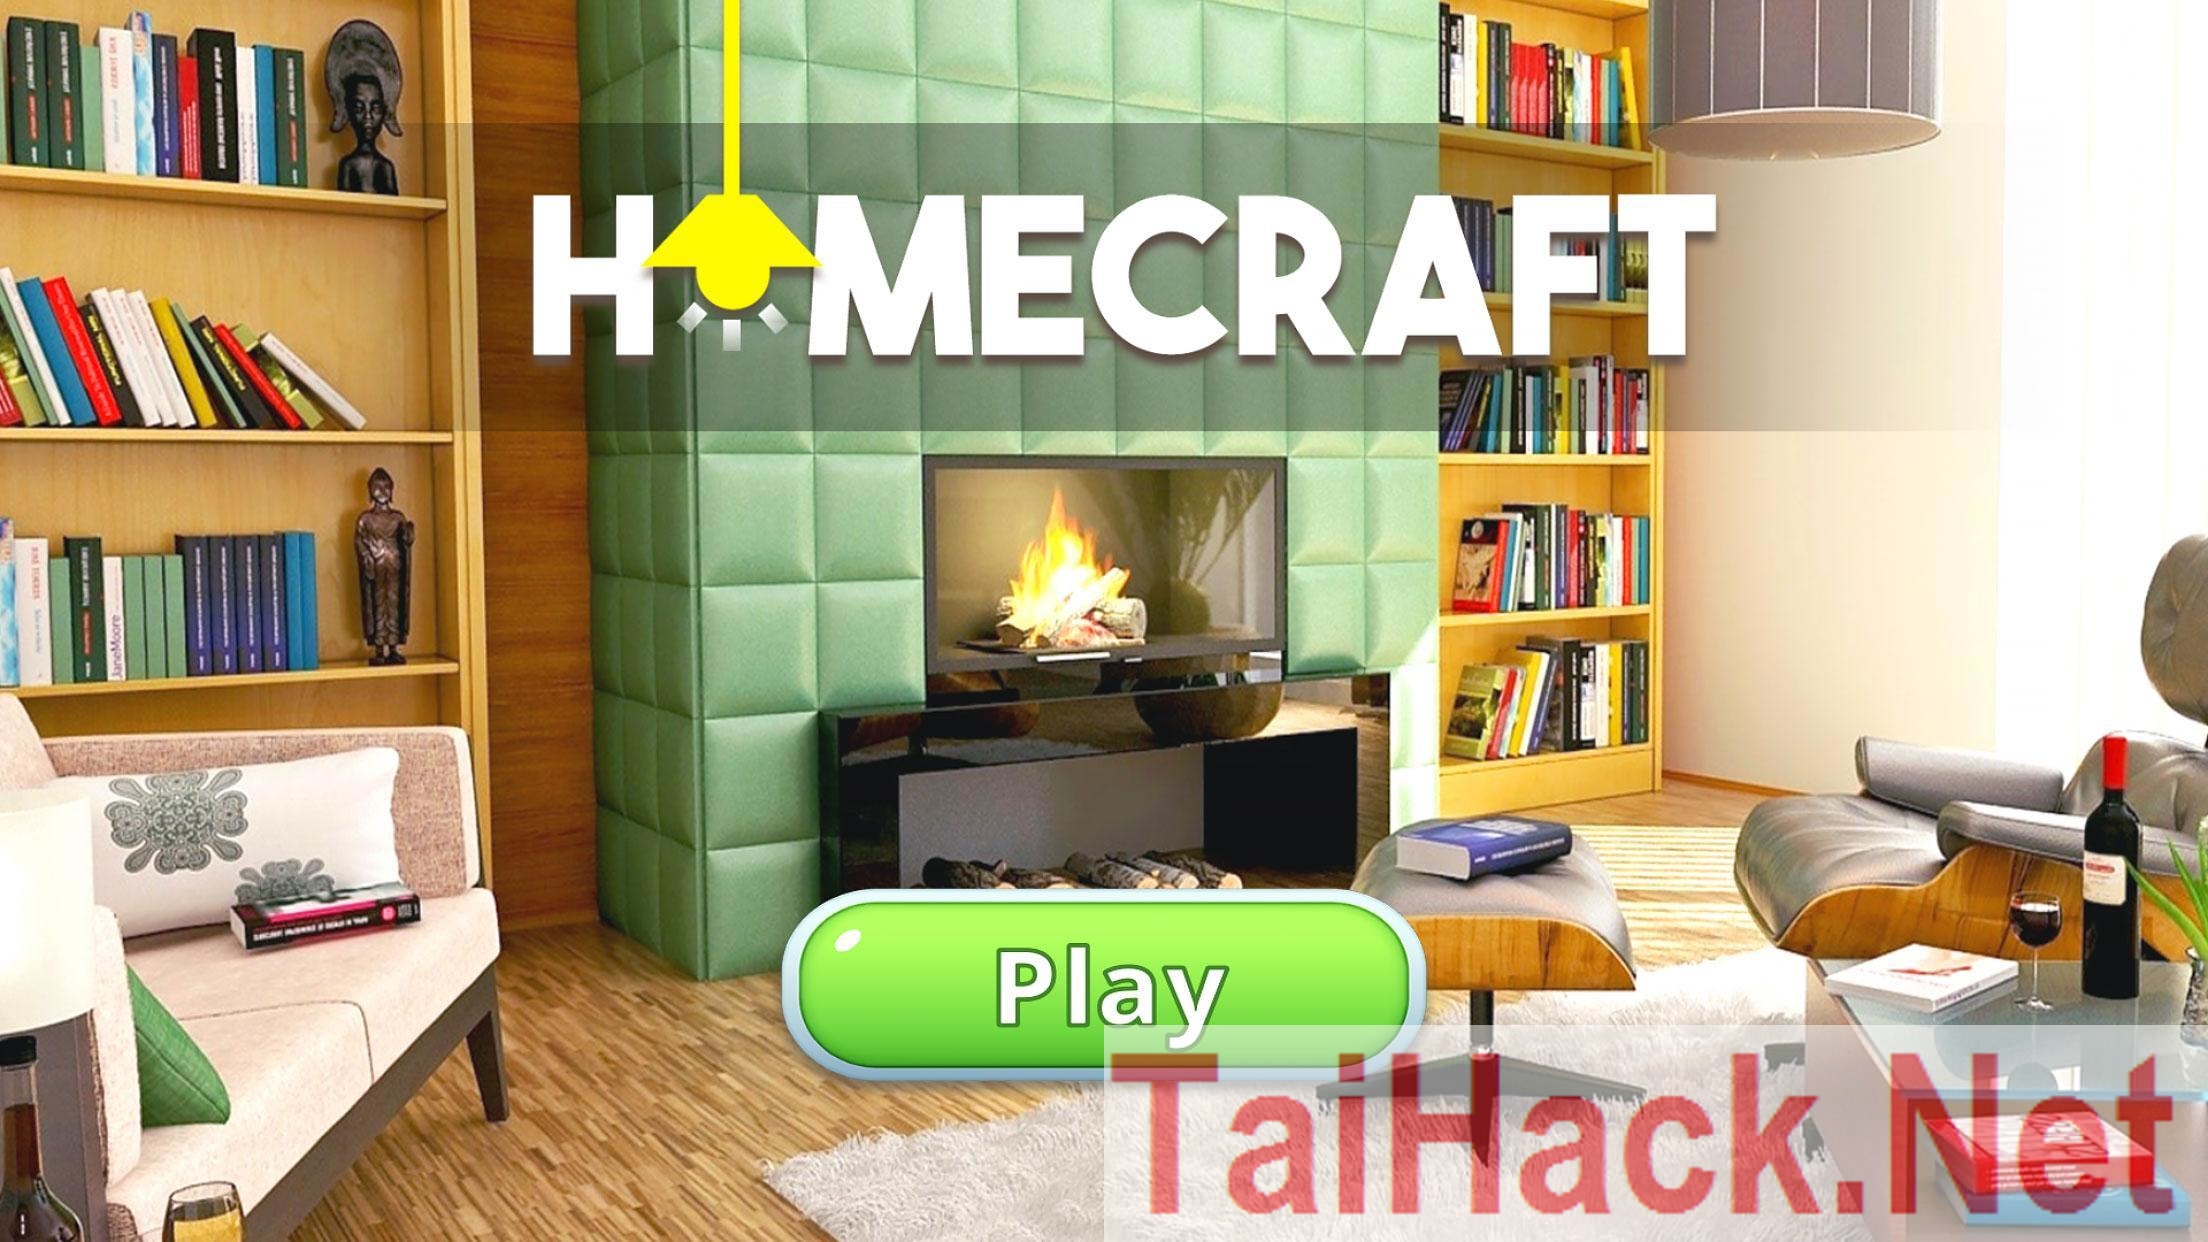 Download Hack Homecraft - Home Design Game MOD a lot of money / diamonds. Architectural design game for your home extremely attractive. In this hack, you can completely master the game with the hack feature full of money and diamonds so you can do everything you like without having to think about money. Update all the latest game hacks at TaiHack.Net